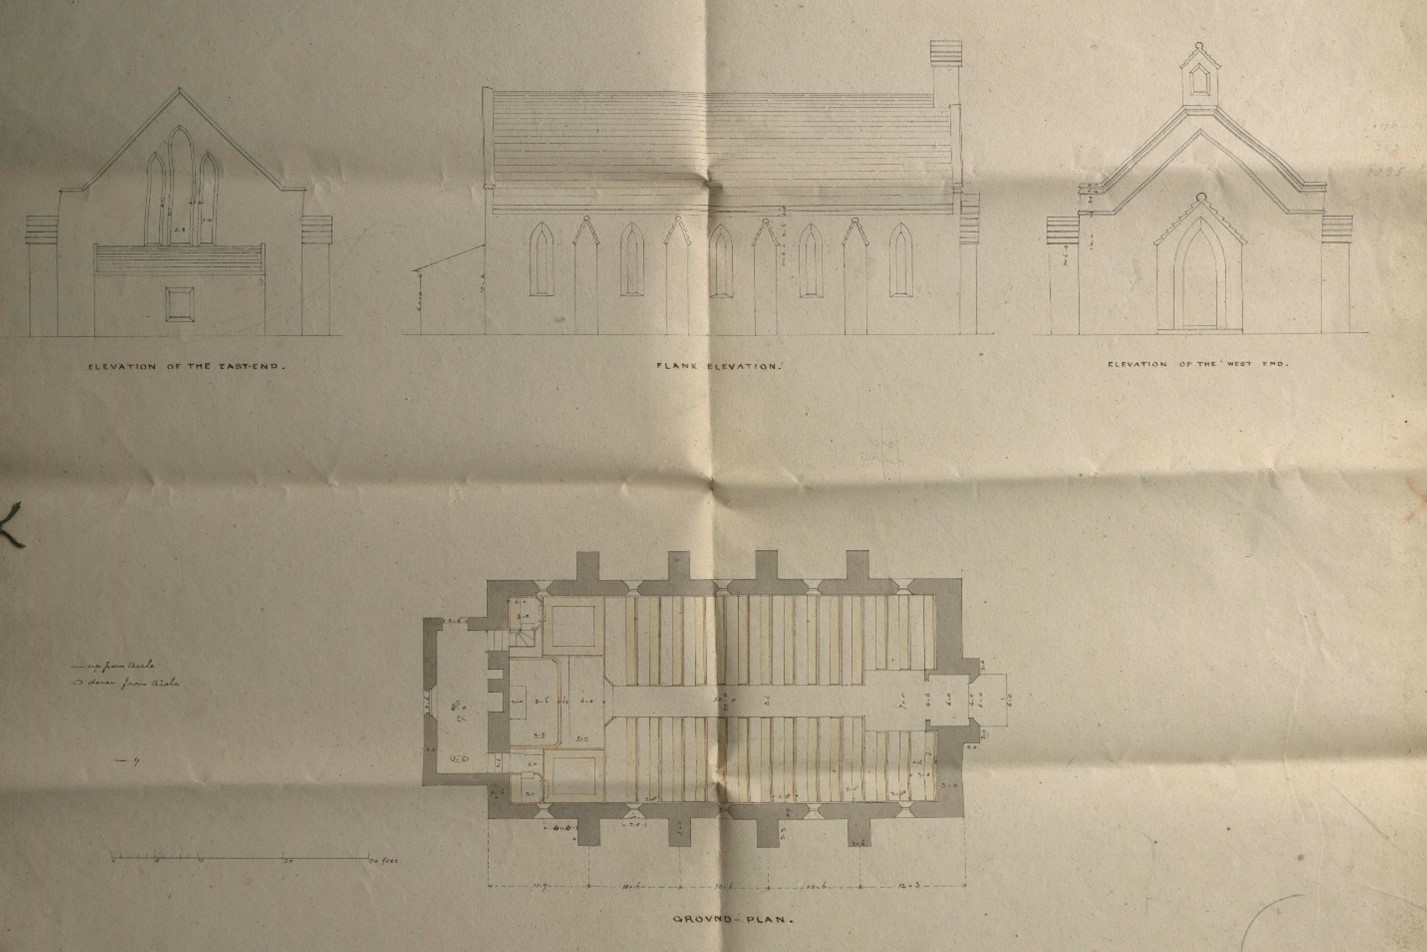 John Semple & Son, “Dunganstown. Redcross. Ground Plan. Elevation of East End. West End. Flank Elevation John Semple & Son,” RCB Library - Architectural Drawings, accessed April 4, 2023, https://archdrawing.ireland.anglican.org/items/show/9849.